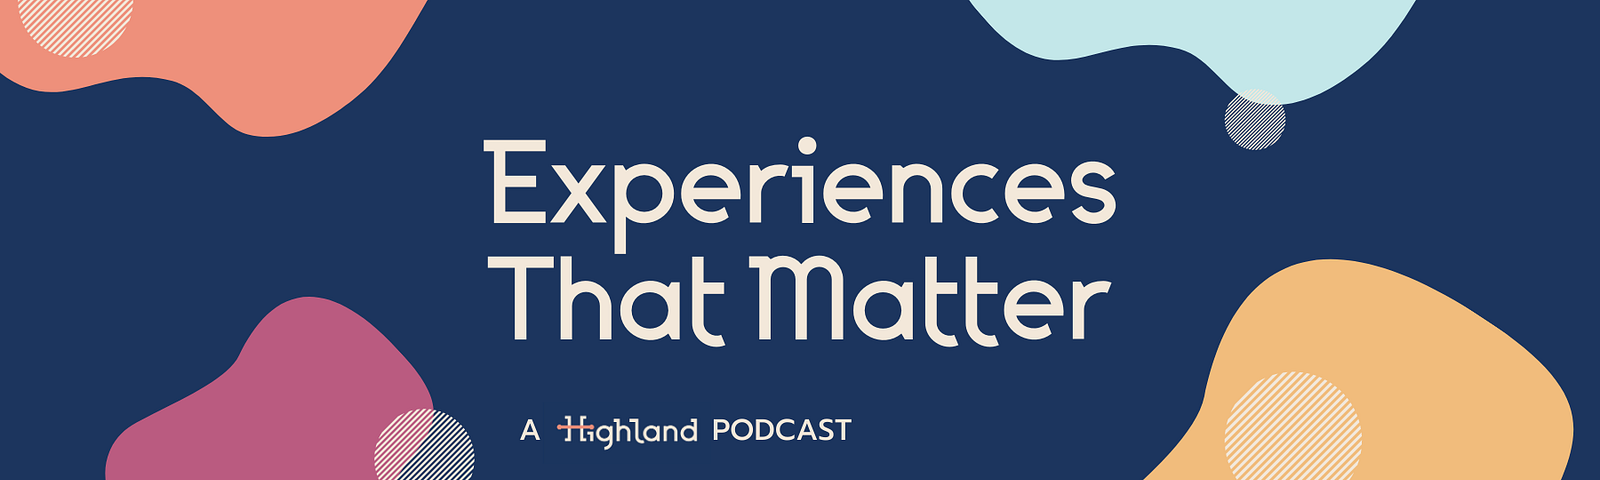 The Experiences That Matter Podcast logo with organic shapes in Highland’s brand colors moving in the corners of the screen